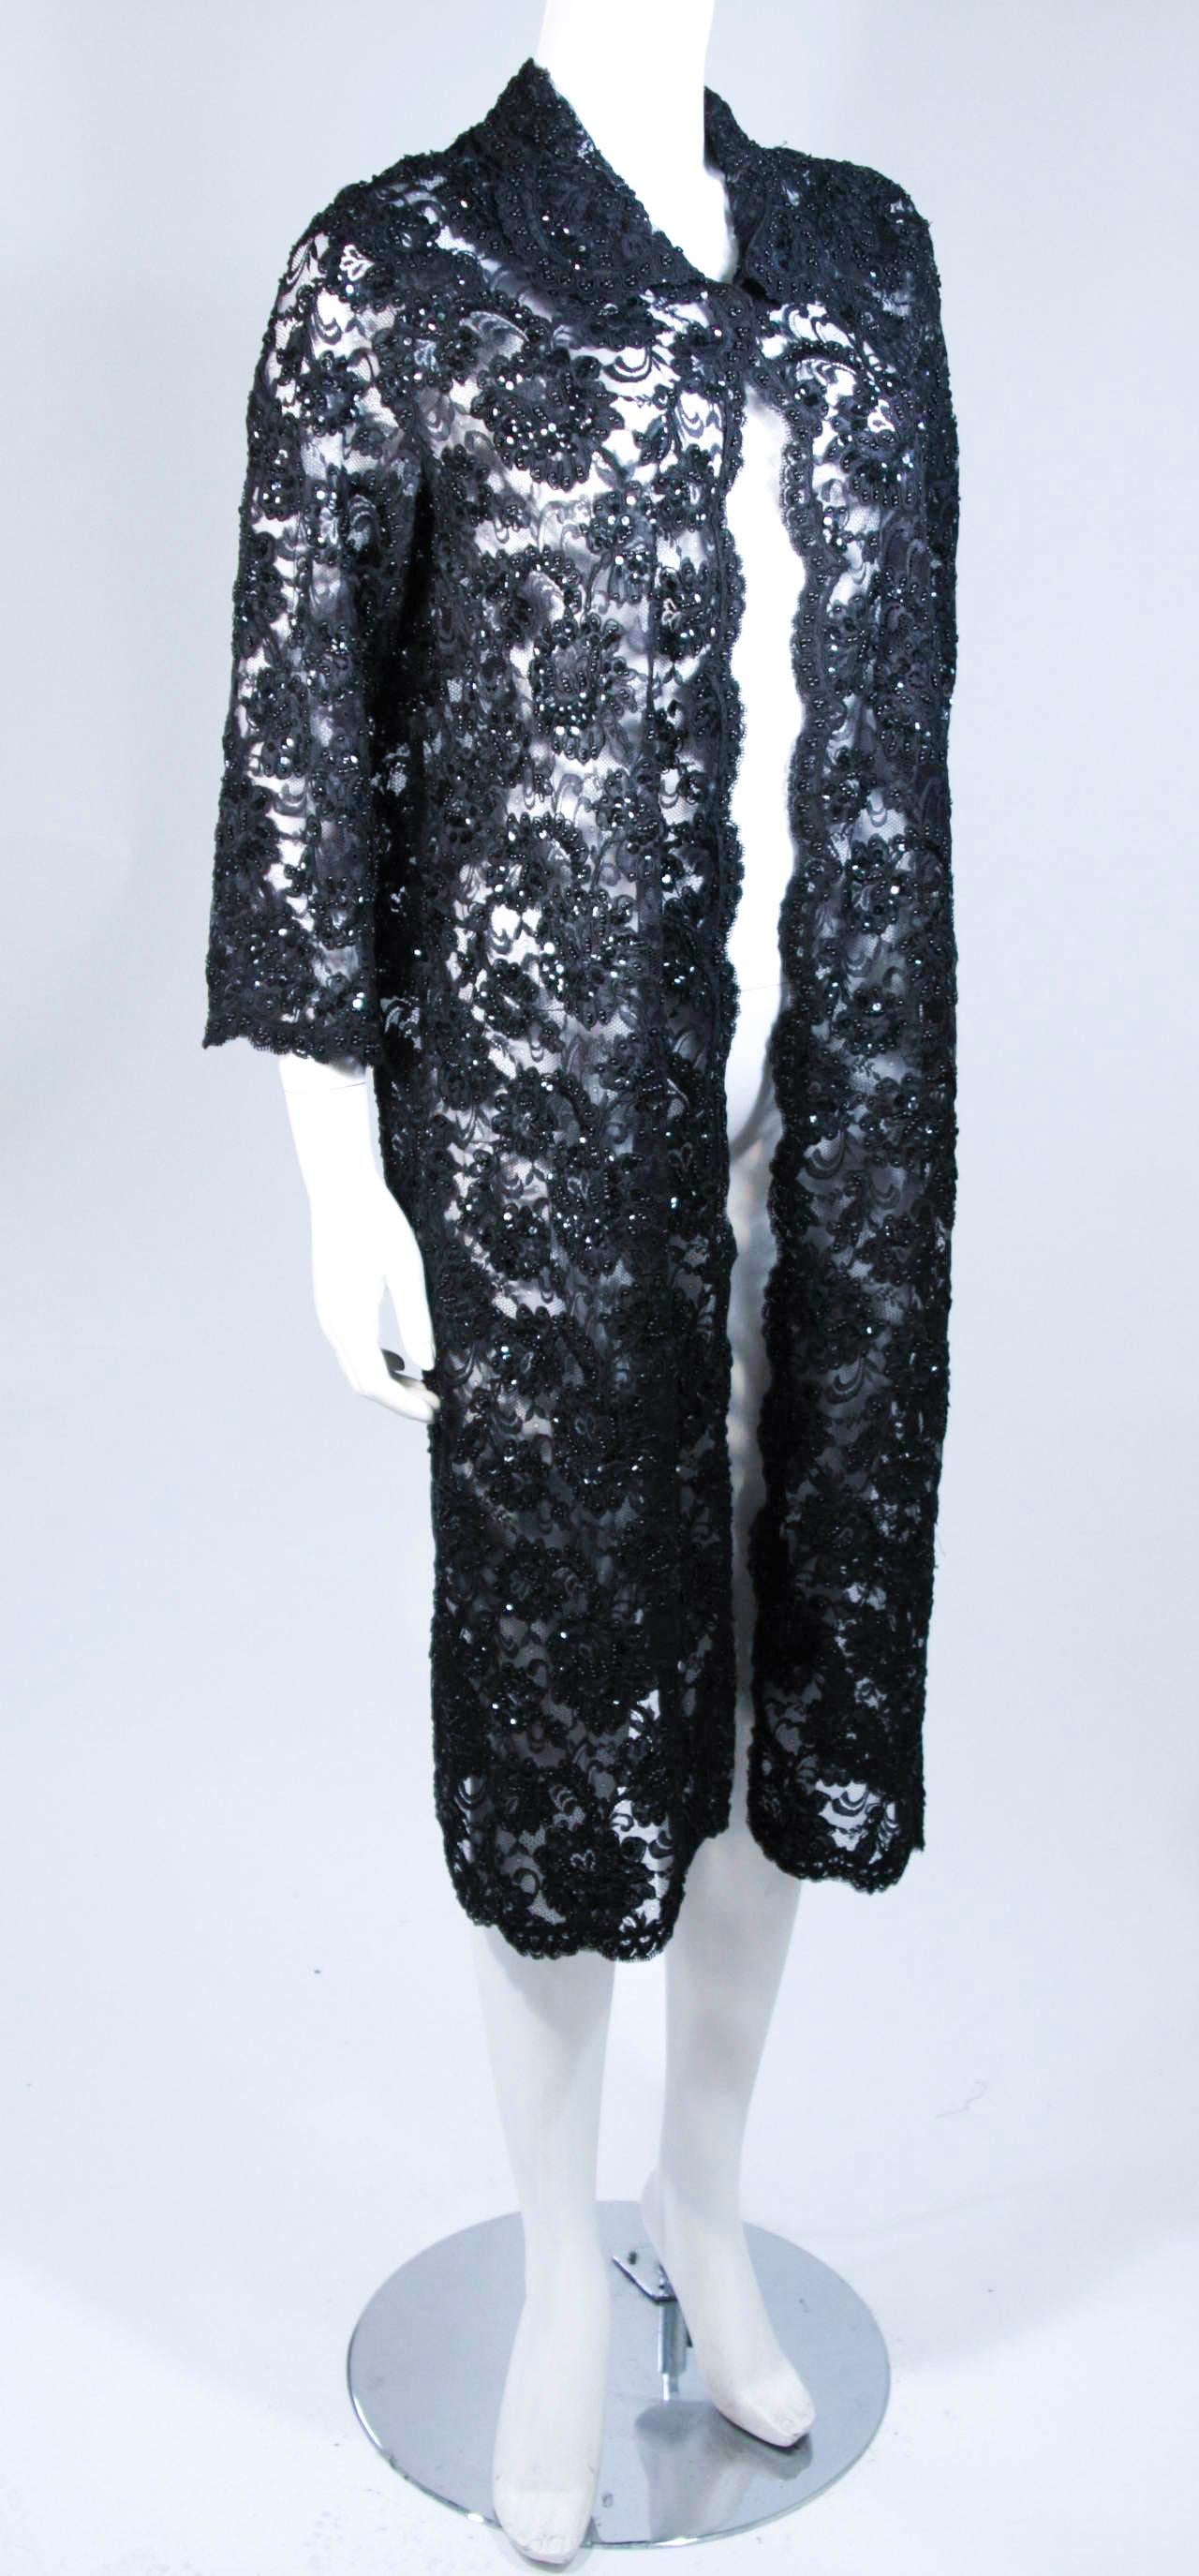 ELIZABETH MASON COUTURE Black Beaded Lace Evening Coat Made to Order For Sale 2